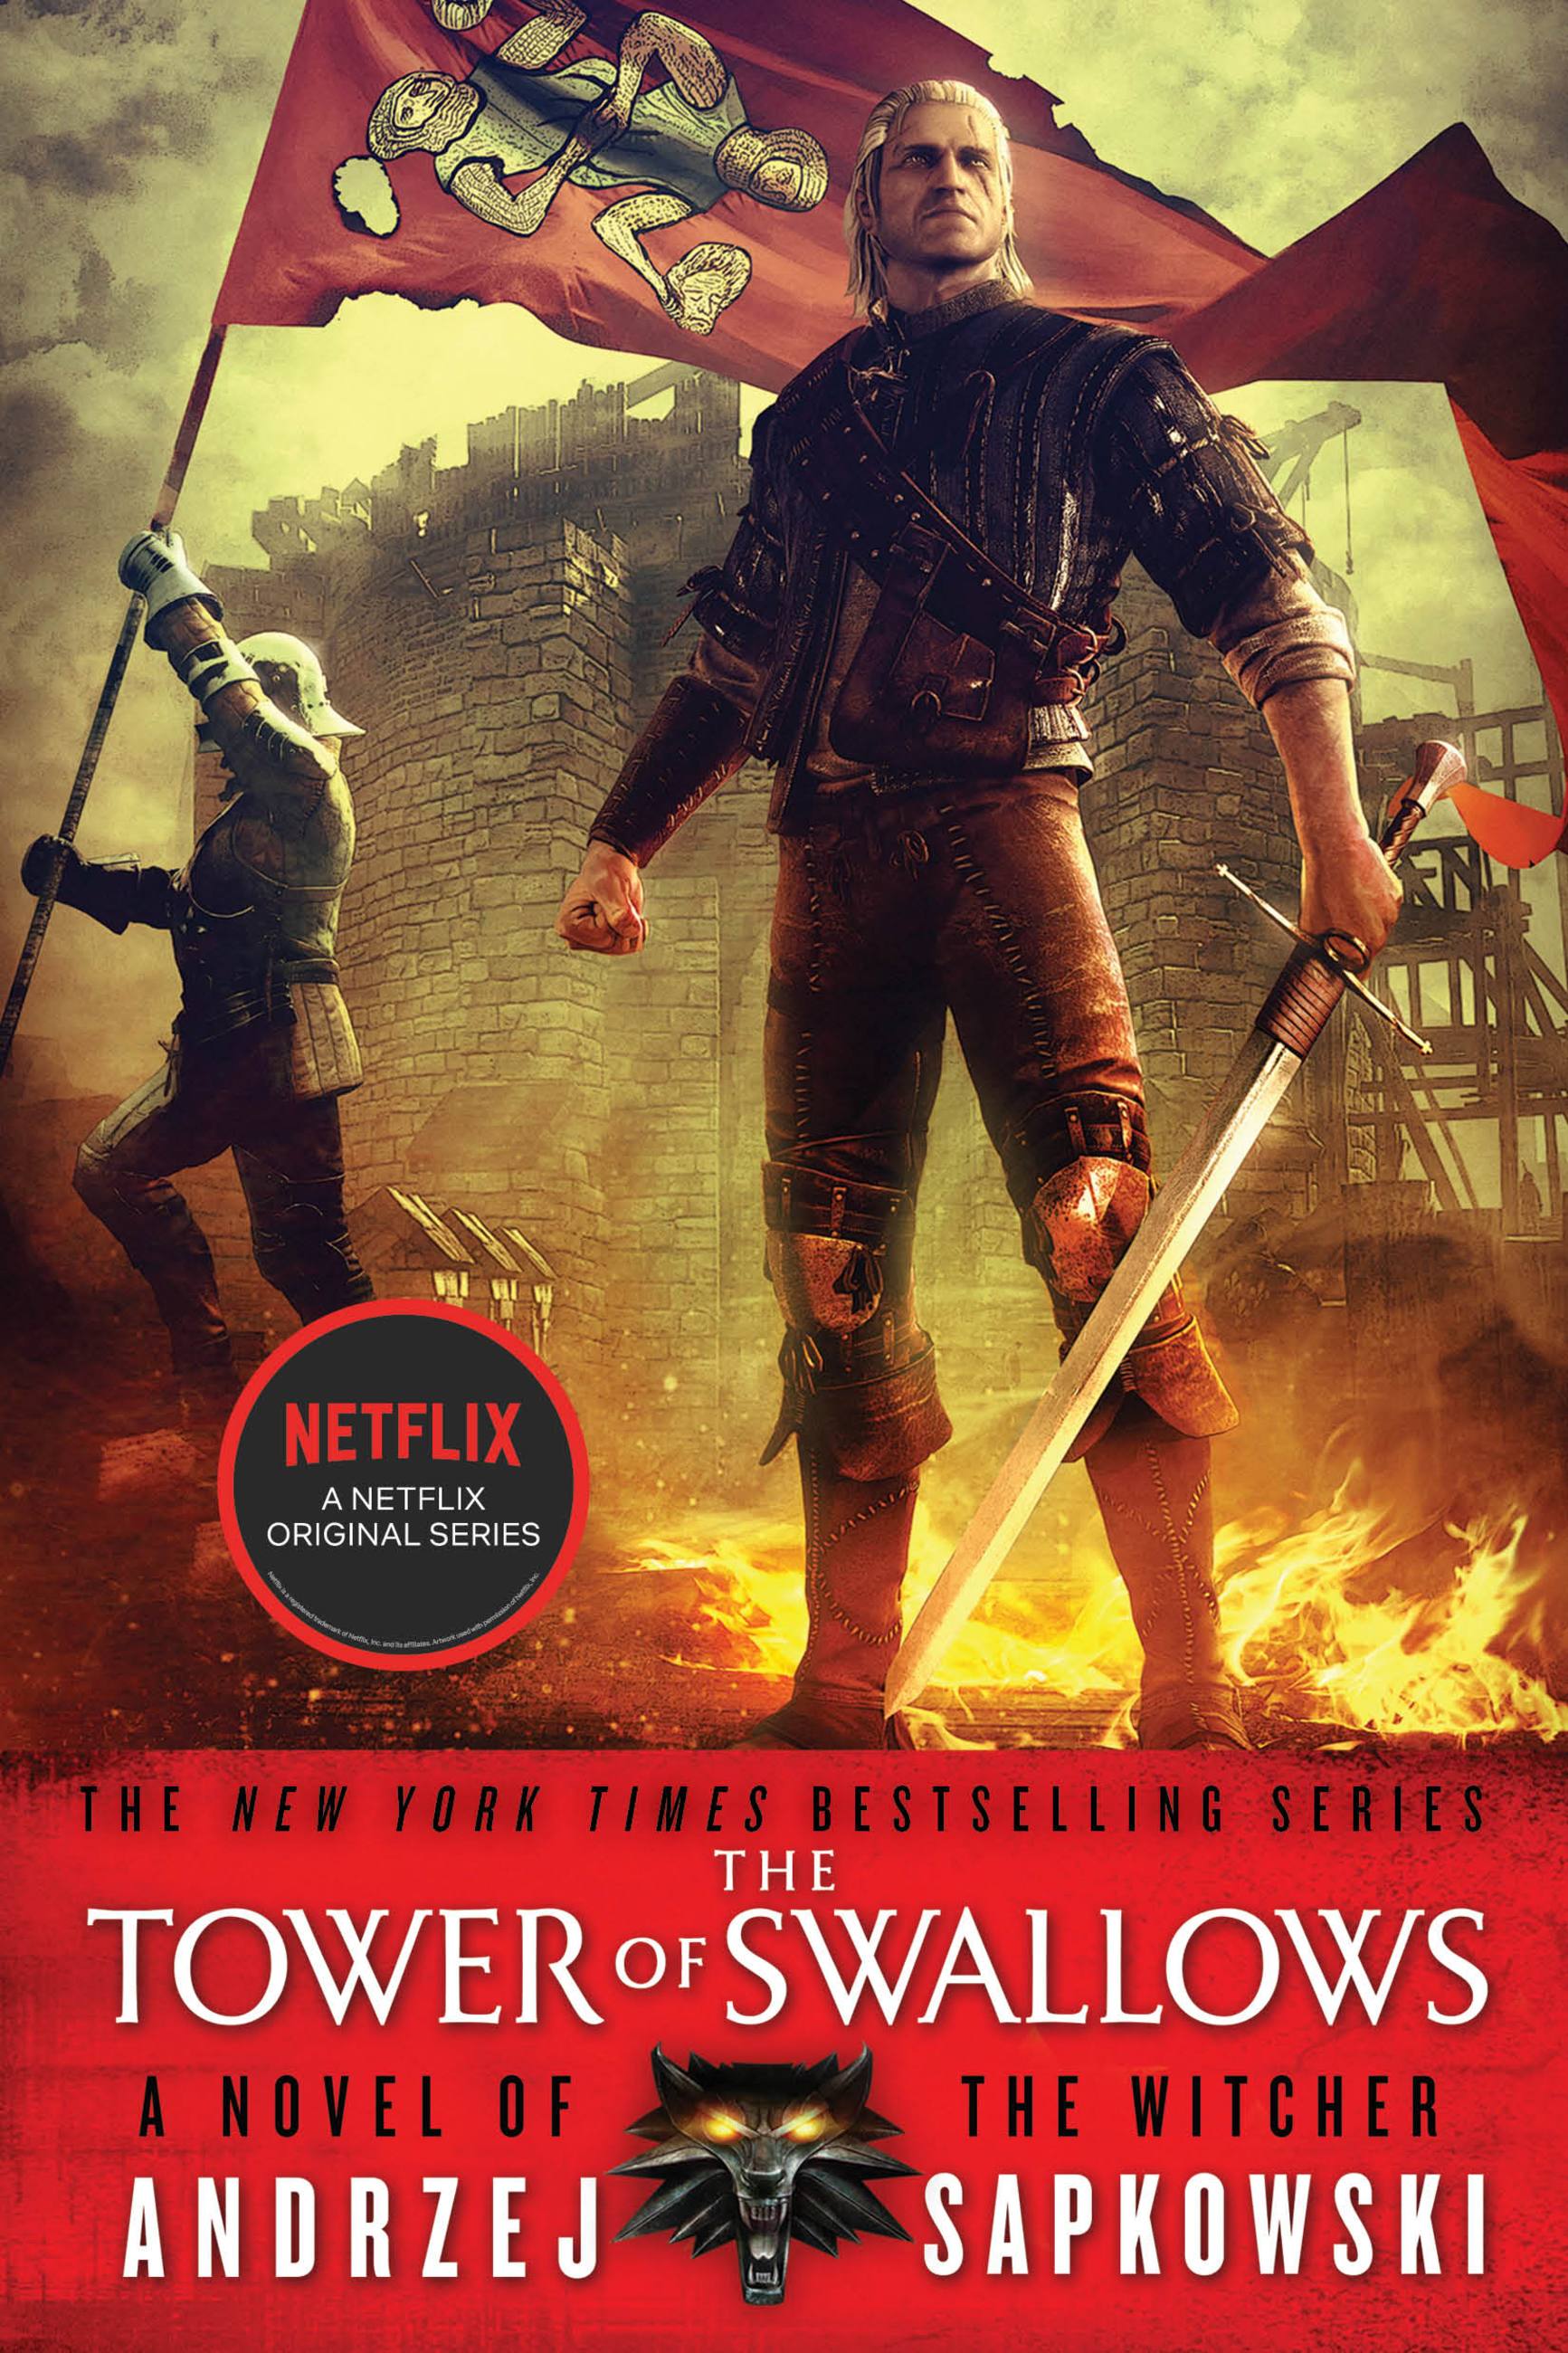 The world of the witcher by Stavious Crowe - Issuu